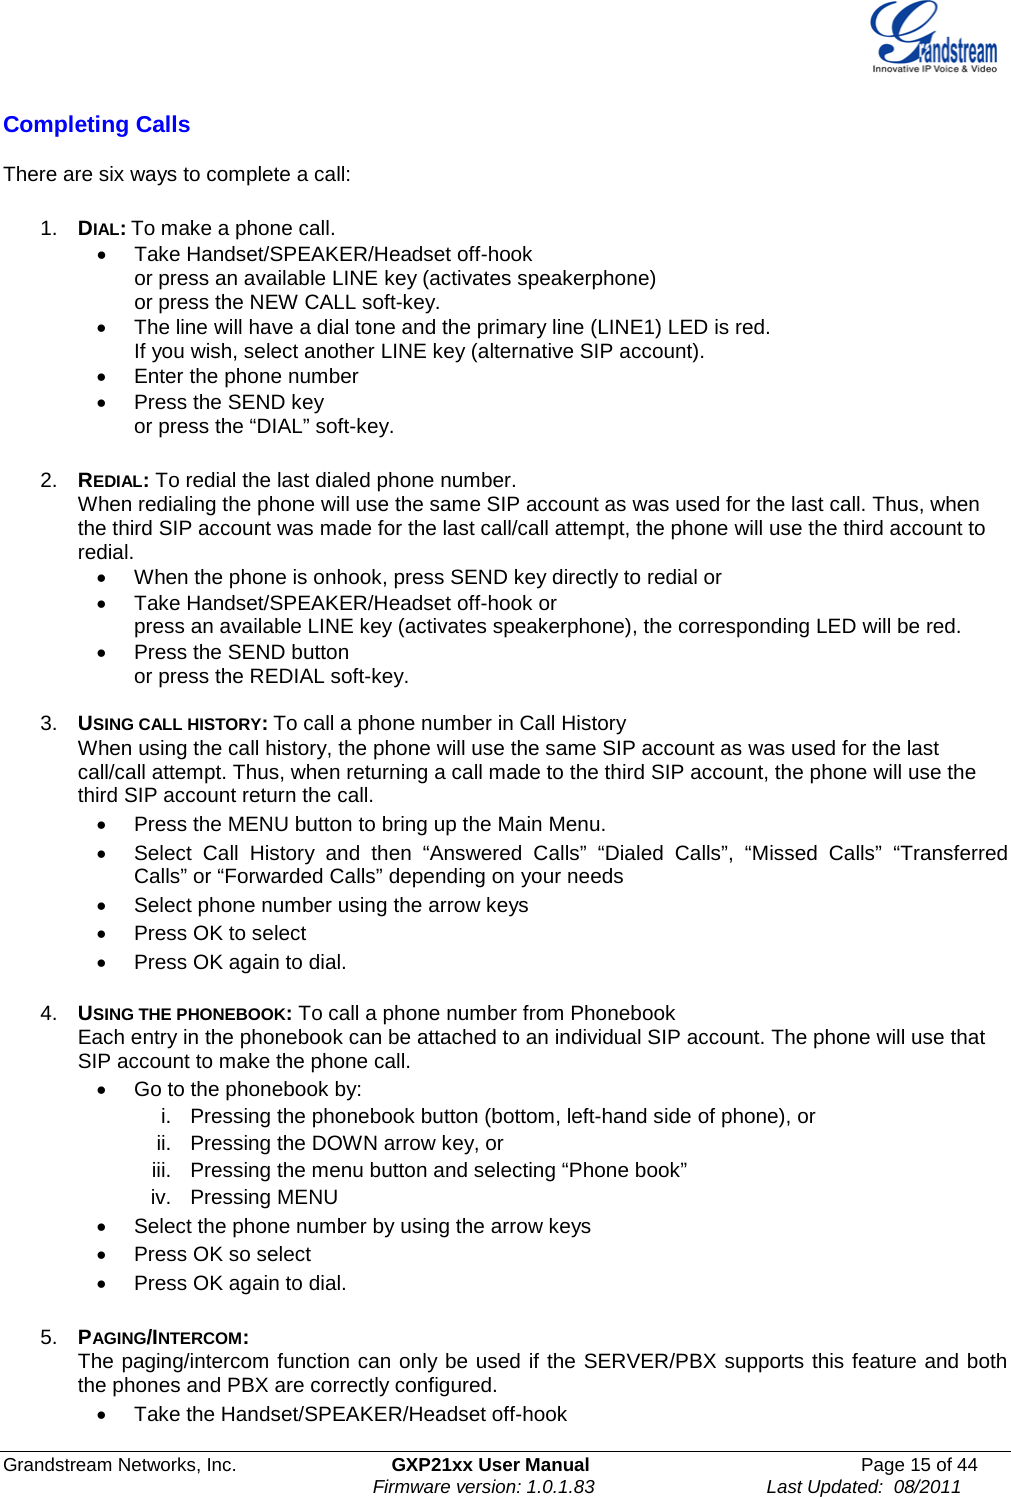  Grandstream Networks, Inc. GXP21xx User Manual Page 15 of 44                                                               Firmware version: 1.0.1.83                                 Last Updated:  08/2011  Completing Calls  There are six ways to complete a call:  1. DIAL: To make a phone call. • Take Handset/SPEAKER/Headset off-hook  or press an available LINE key (activates speakerphone)  or press the NEW CALL soft-key.   • The line will have a dial tone and the primary line (LINE1) LED is red.   If you wish, select another LINE key (alternative SIP account).   • Enter the phone number  •  Press the SEND key  or press the “DIAL” soft-key.  2. REDIAL: To redial the last dialed phone number. When redialing the phone will use the same SIP account as was used for the last call. Thus, when the third SIP account was made for the last call/call attempt, the phone will use the third account to redial. • When the phone is onhook, press SEND key directly to redial or • Take Handset/SPEAKER/Headset off-hook or press an available LINE key (activates speakerphone), the corresponding LED will be red.  • Press the SEND button or press the REDIAL soft-key.  3. USING CALL HISTORY: To call a phone number in Call History When using the call history, the phone will use the same SIP account as was used for the last call/call attempt. Thus, when returning a call made to the third SIP account, the phone will use the third SIP account return the call. • Press the MENU button to bring up the Main Menu.   • Select Call History and then “Answered Calls” “Dialed Calls”, “Missed Calls” “Transferred Calls” or “Forwarded Calls” depending on your needs • Select phone number using the arrow keys • Press OK to select  • Press OK again to dial.  4. USING THE PHONEBOOK: To call a phone number from Phonebook Each entry in the phonebook can be attached to an individual SIP account. The phone will use that SIP account to make the phone call.  • Go to the phonebook by: i. Pressing the phonebook button (bottom, left-hand side of phone), or ii. Pressing the DOWN arrow key, or iii. Pressing the menu button and selecting “Phone book” iv. Pressing MENU • Select the phone number by using the arrow keys • Press OK so select • Press OK again to dial.  5. PAGING/INTERCOM:   The paging/intercom function can only be used if the SERVER/PBX supports this feature and both the phones and PBX are correctly configured.  • Take the Handset/SPEAKER/Headset off-hook 